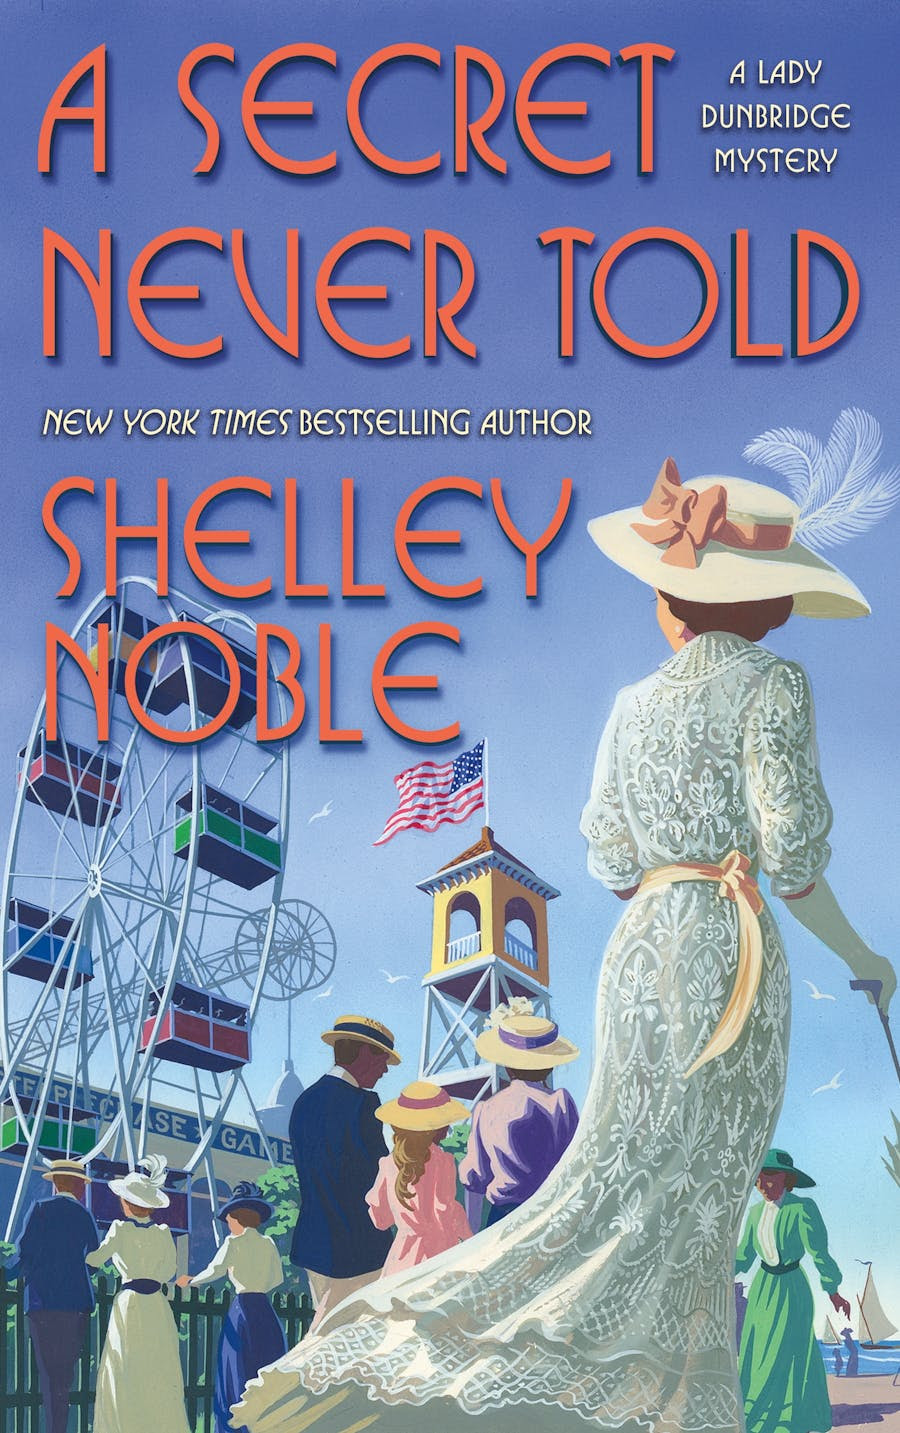 A Secret Never Told by Shelley Noble